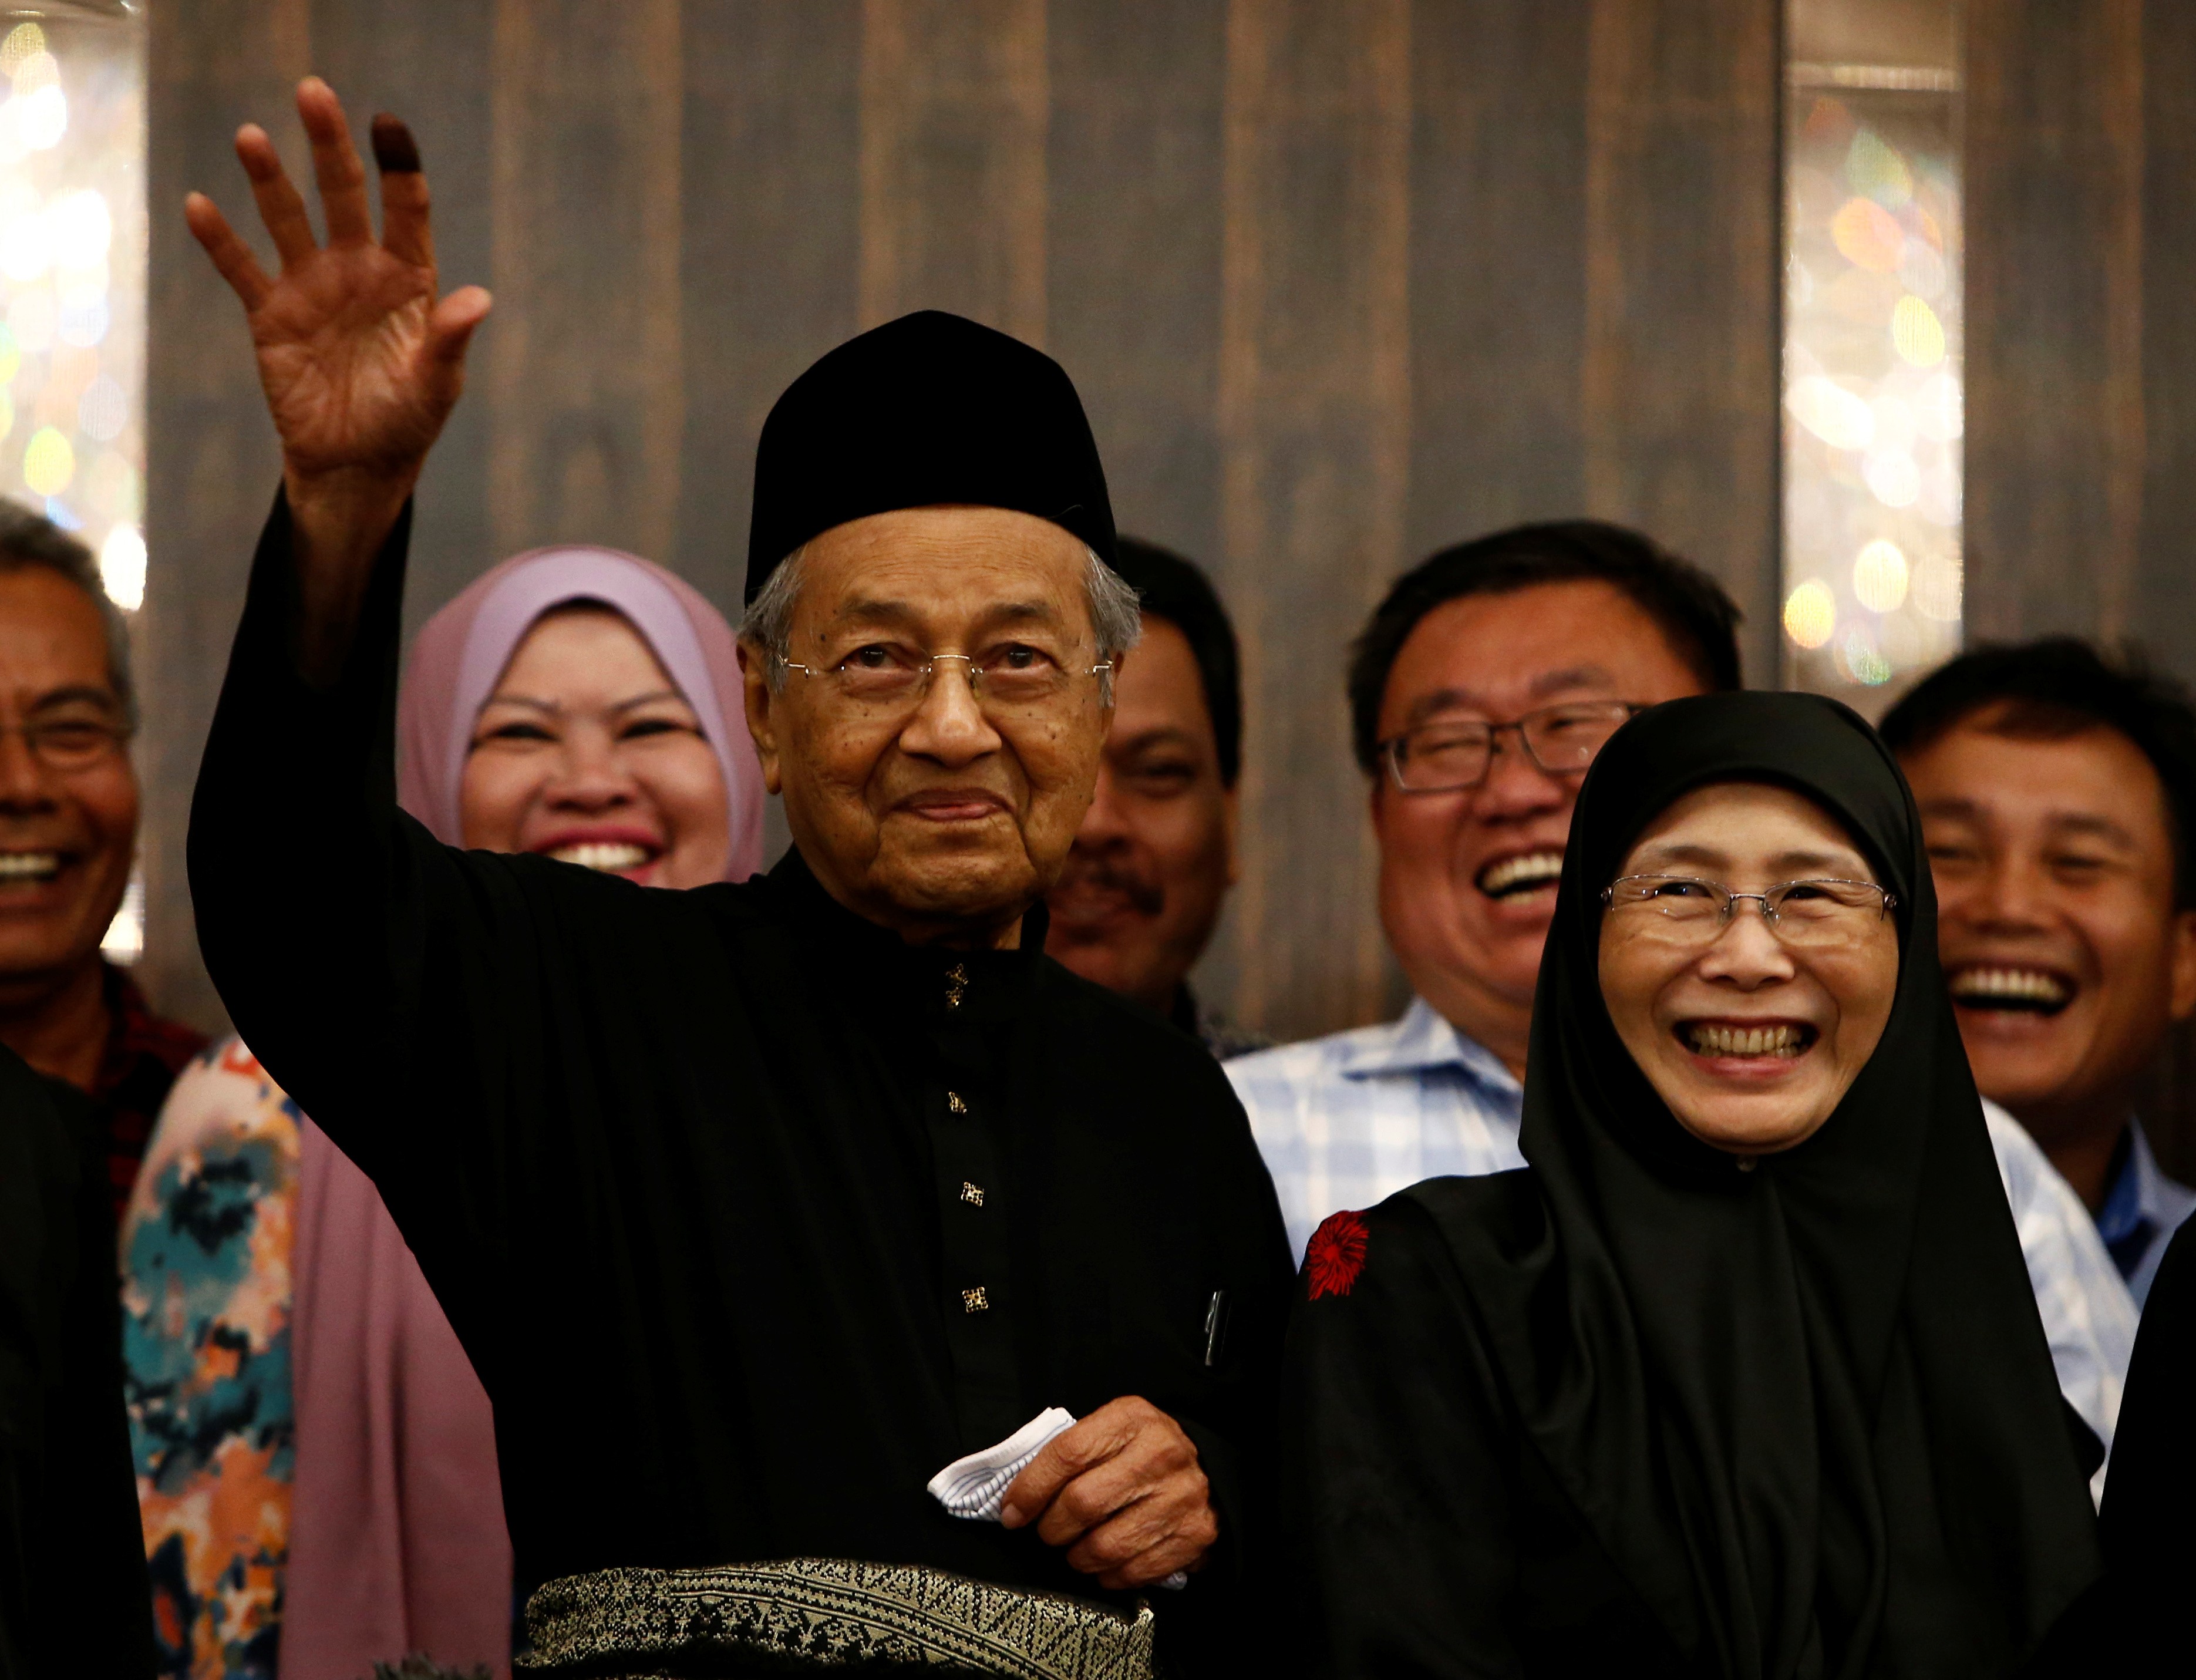 Wong Chin-Huat says Malaysia’s ‘first-past-the-post’ system keeps minority voices from being heard, and the new government should embrace a proportional system that discourages extremism